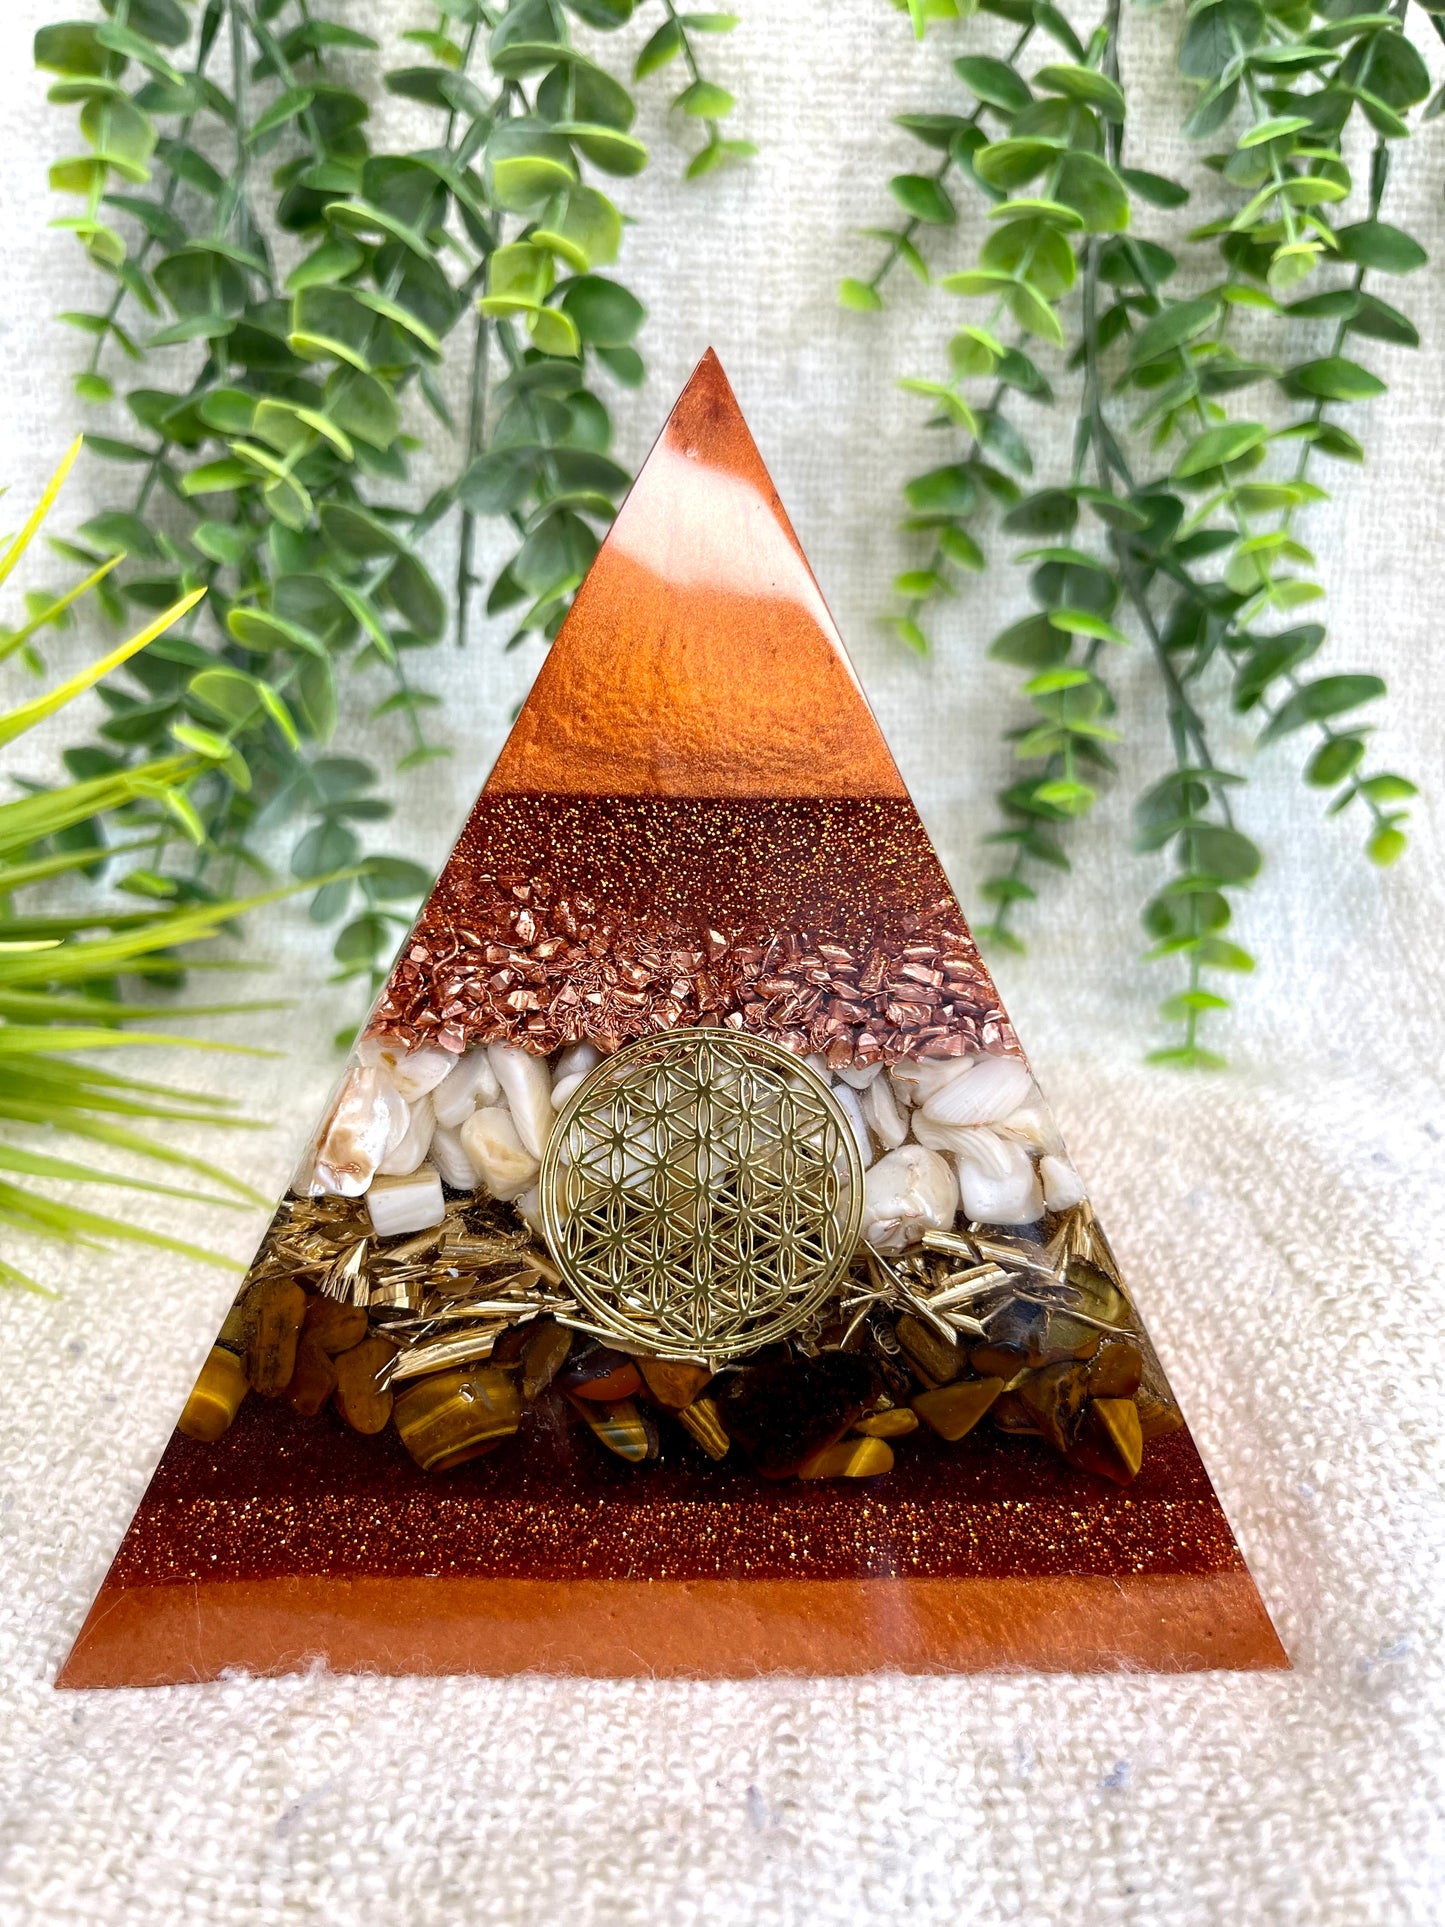 RUTH - Orgonite Pyramid - EMF Protector - Tiger's Eye Crystal, Seashell and Copper and Brass metals